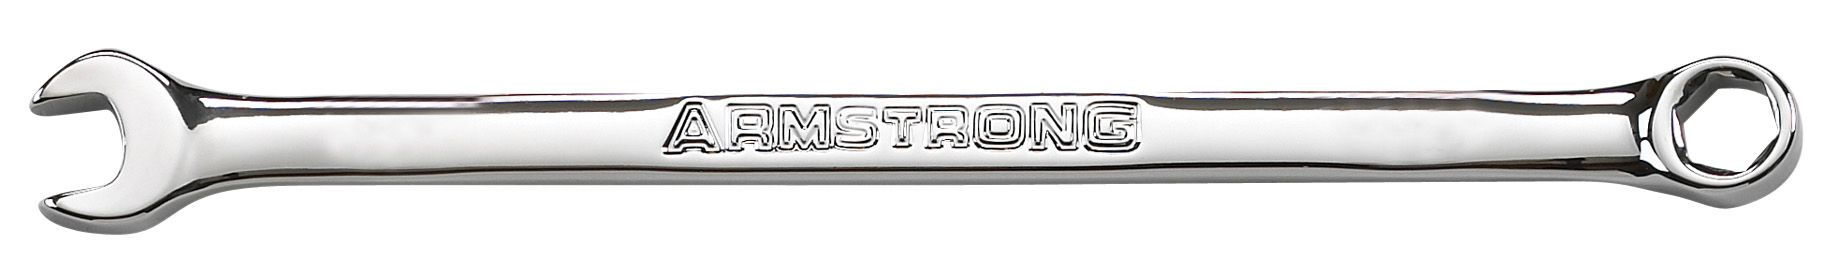 Armstrong 17 mm 6 pt. Full Polish Long Combination Wrench